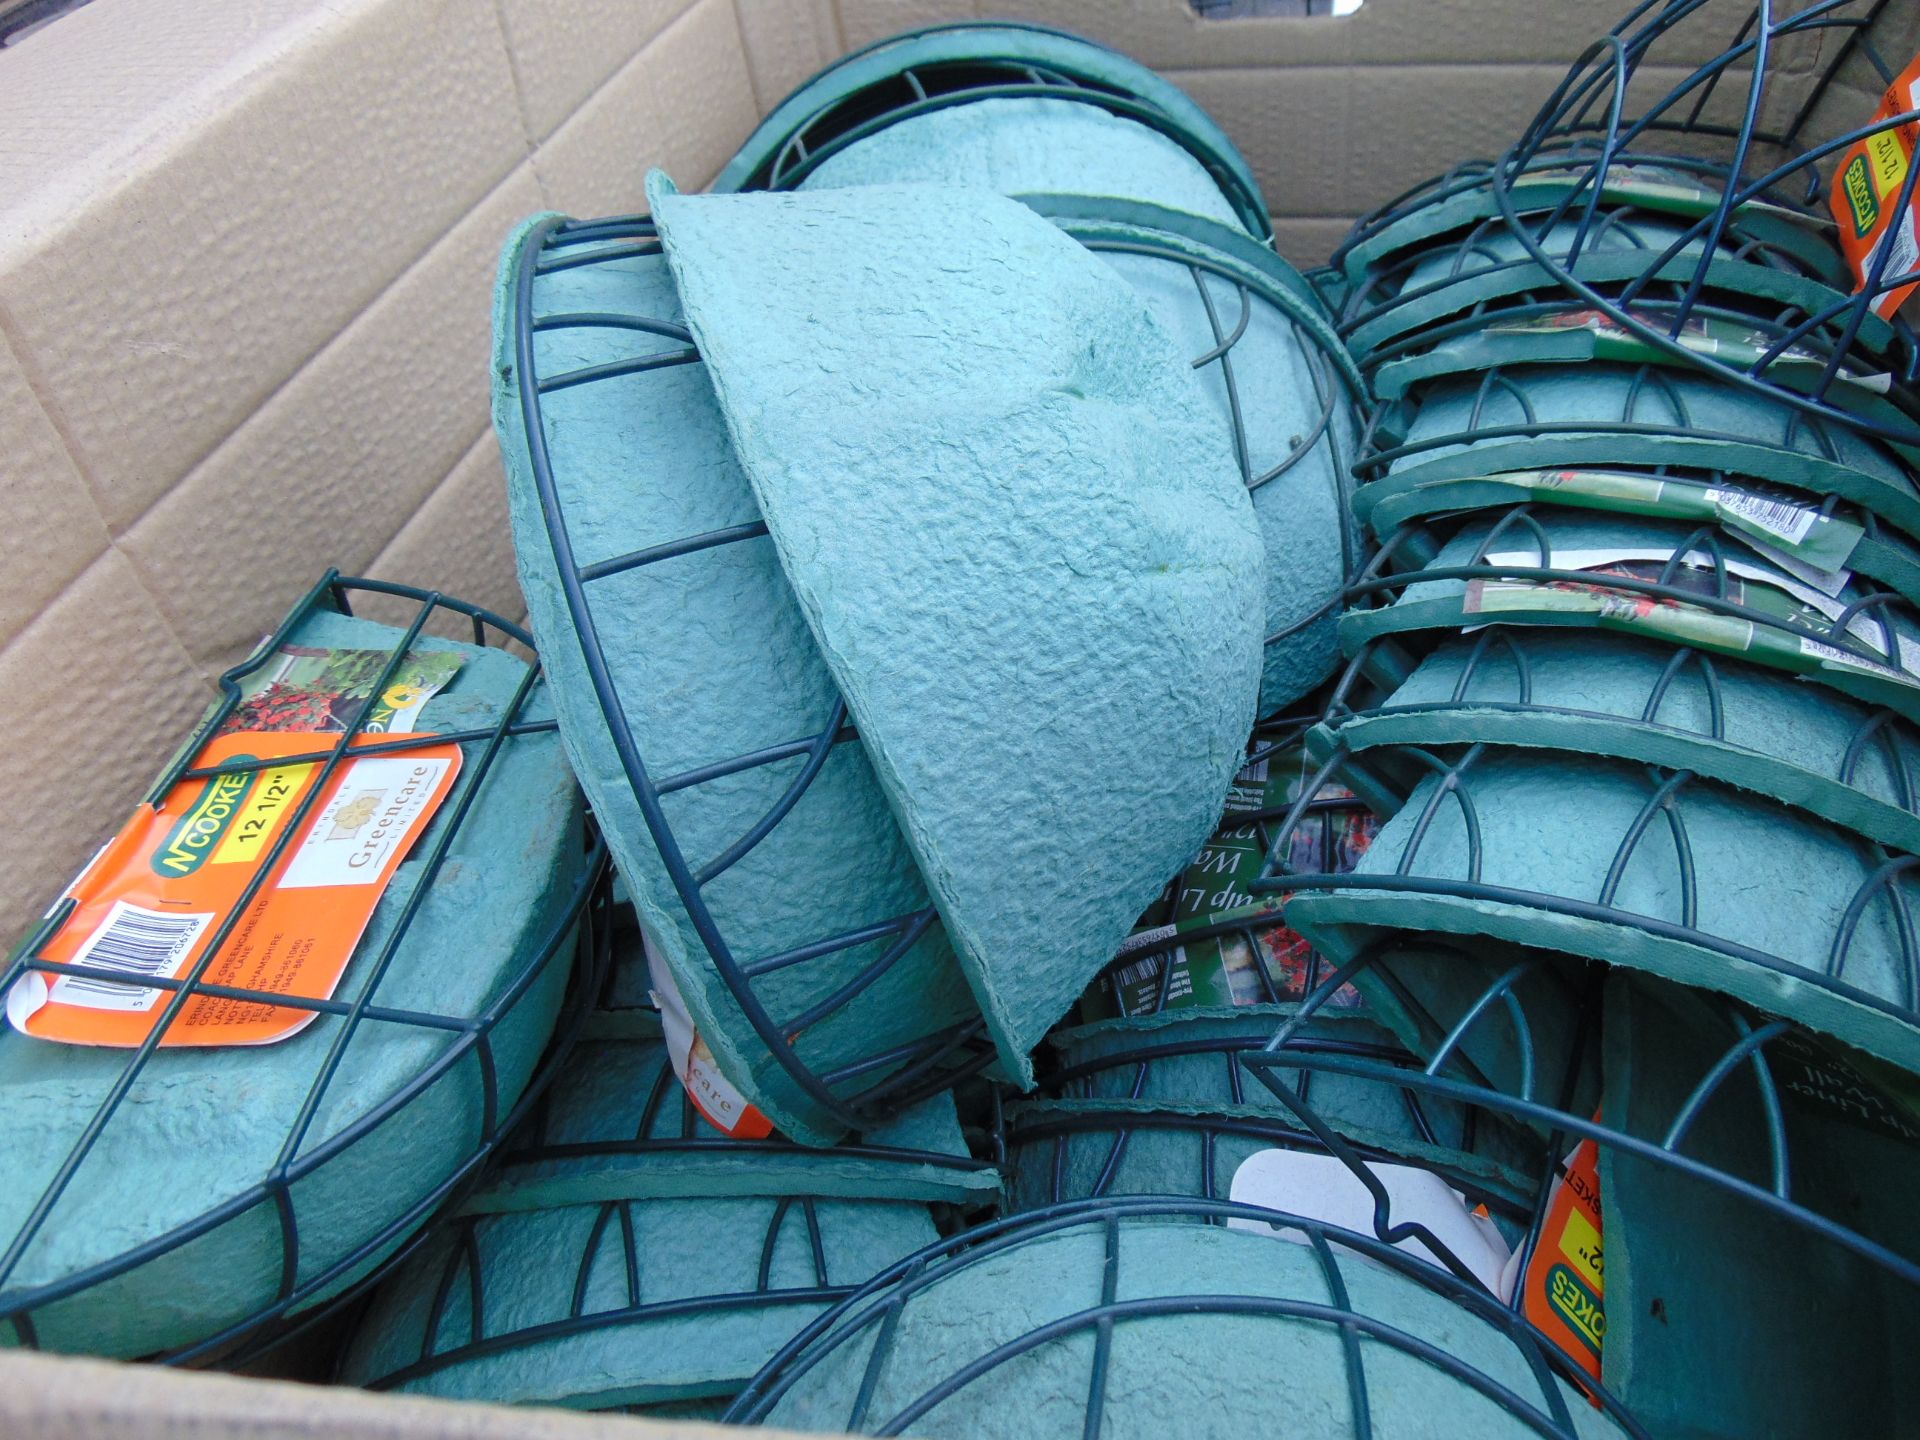 50 x Green hanging baskets and liners new unused - Image 2 of 4